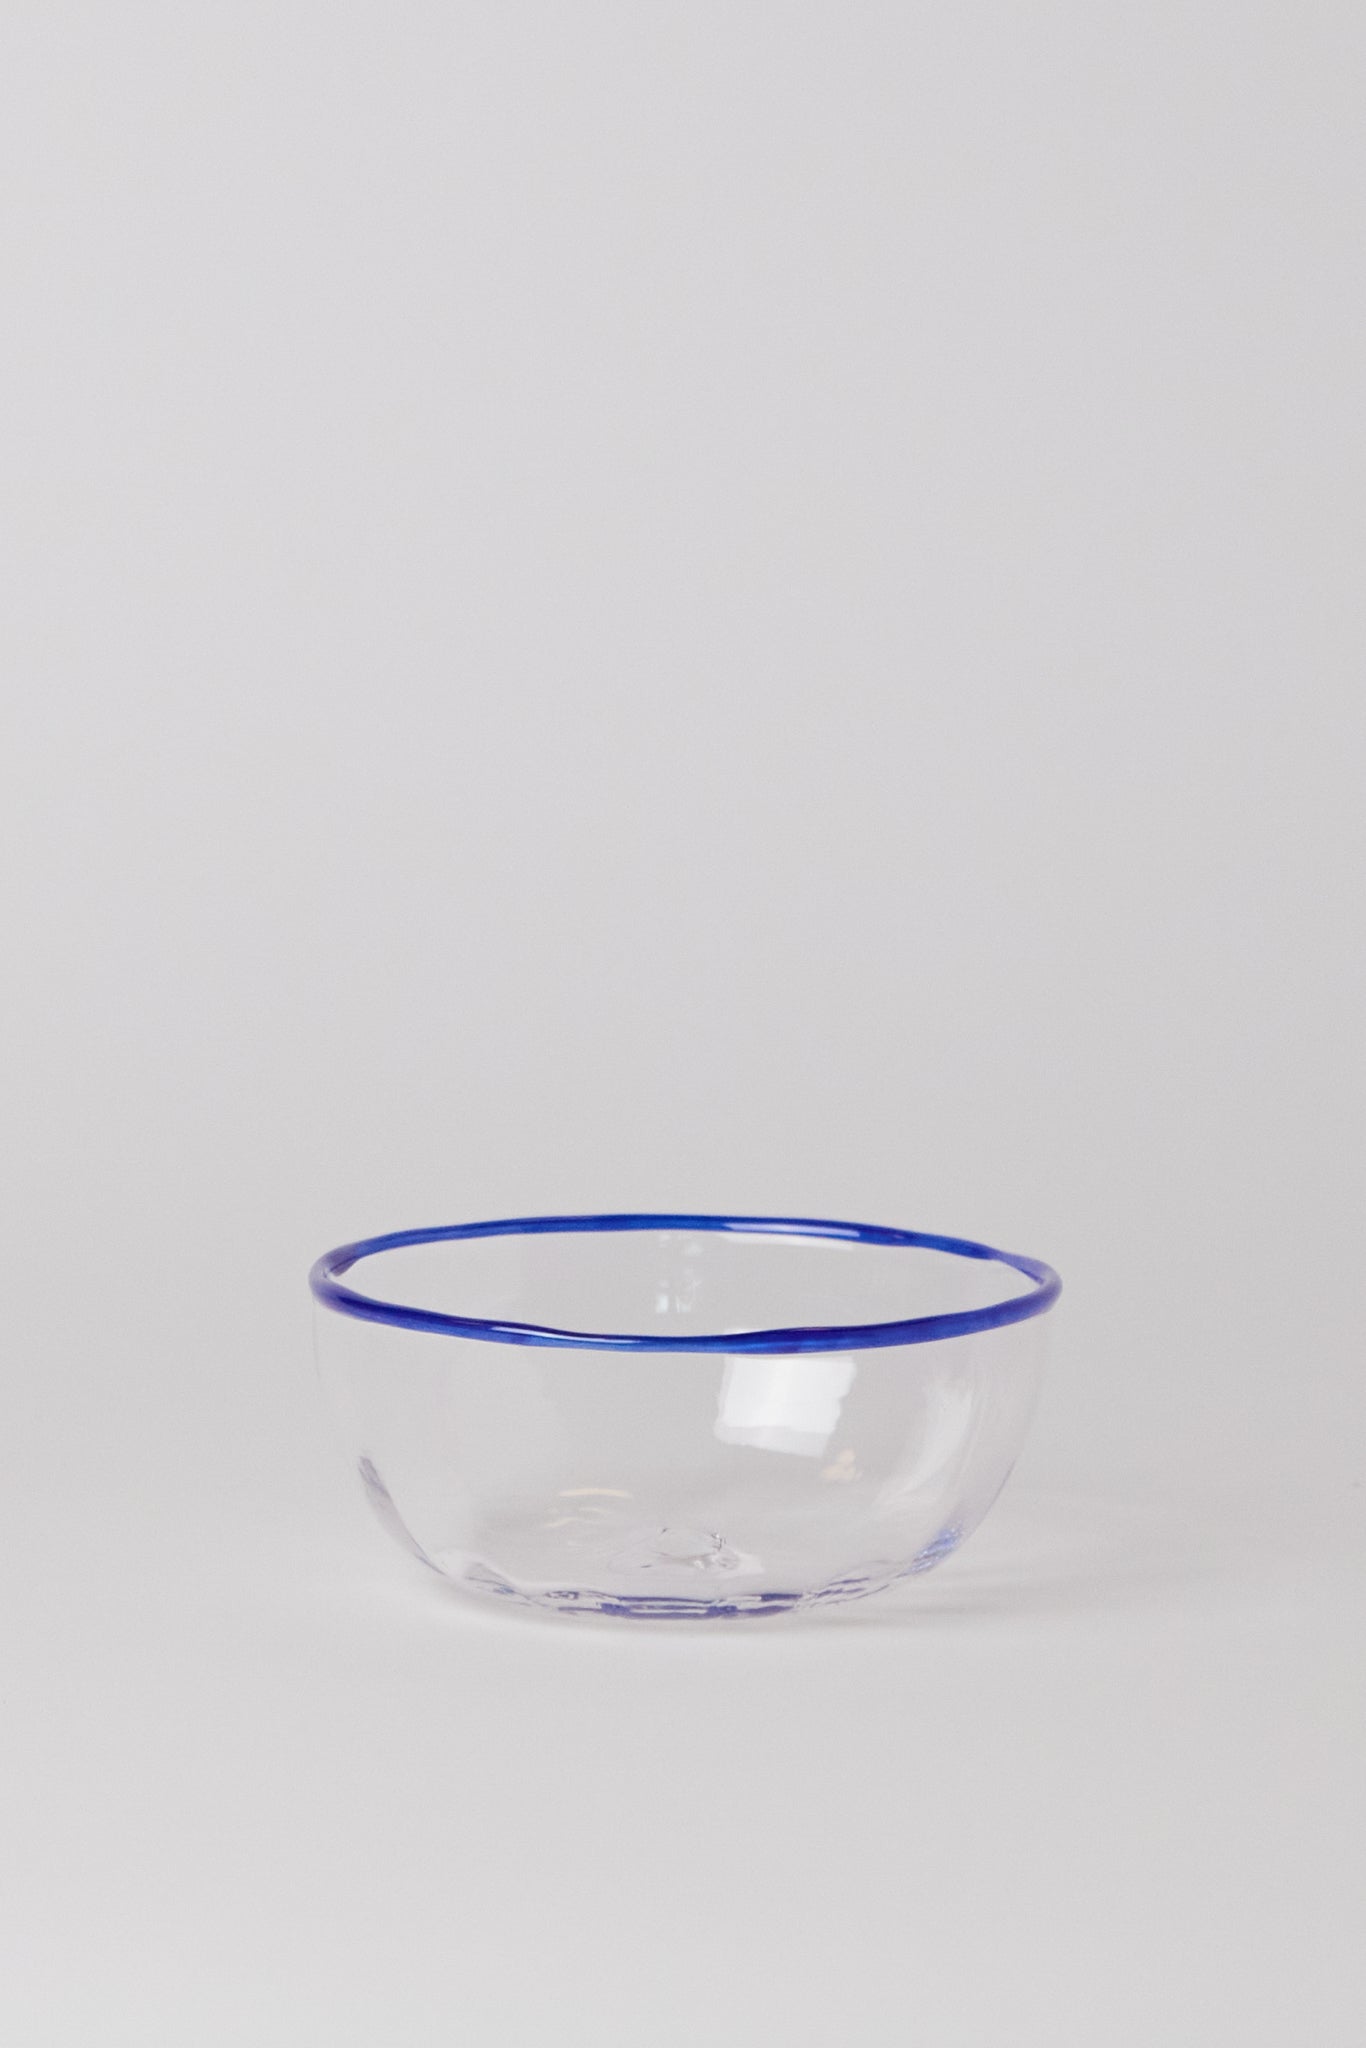 Akua-Objects-Peter-Bowl-in-Sapphire-Shop-SommerAkua-Objects-Peter-Bowl-in-Sapphire-Shop-Sommer